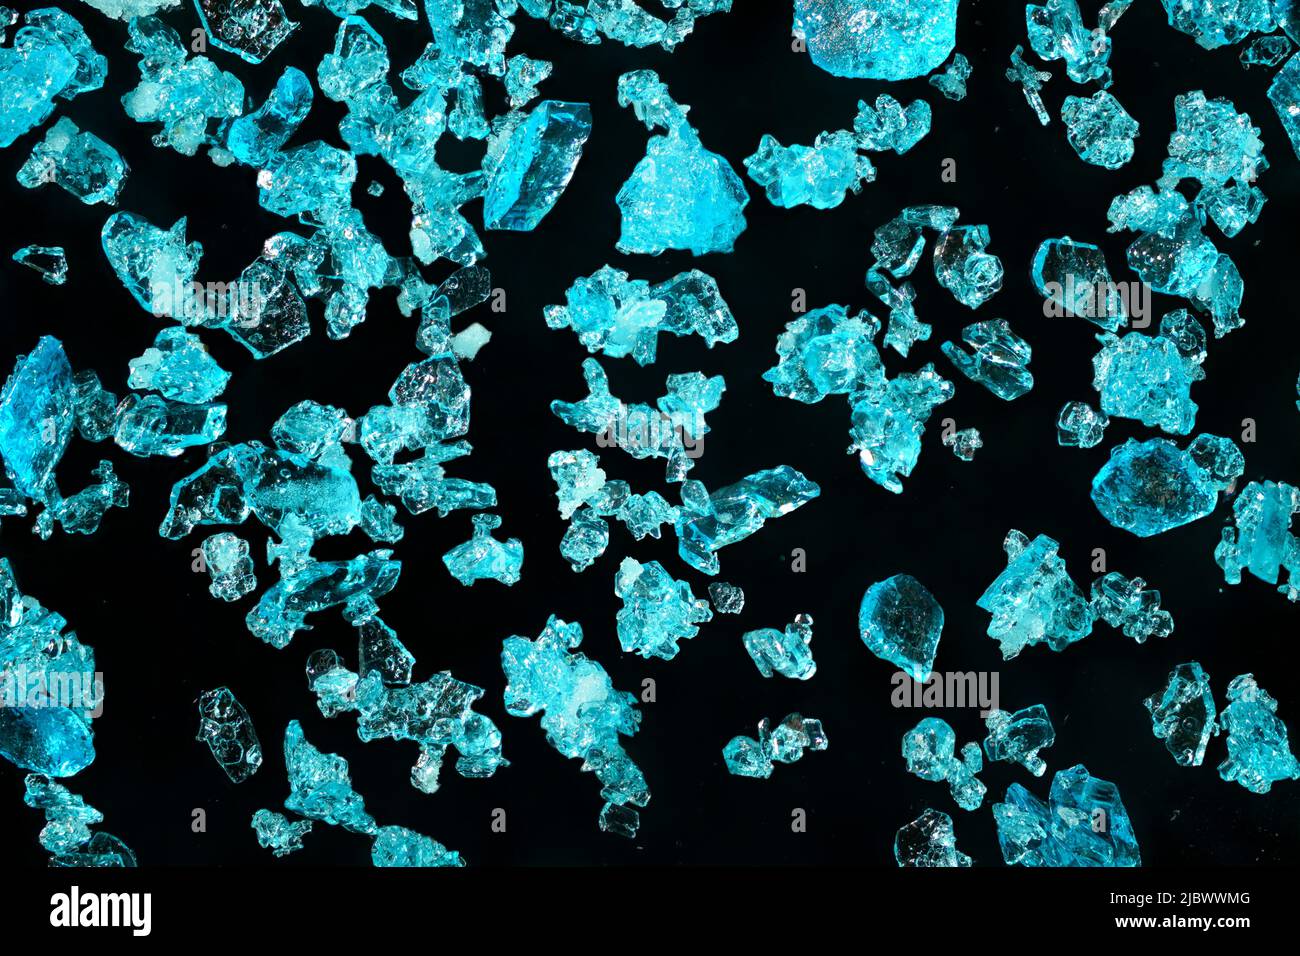 Blue copper sulphate crystals under 4x microscope magnification - image width = 9mm Stock Photo